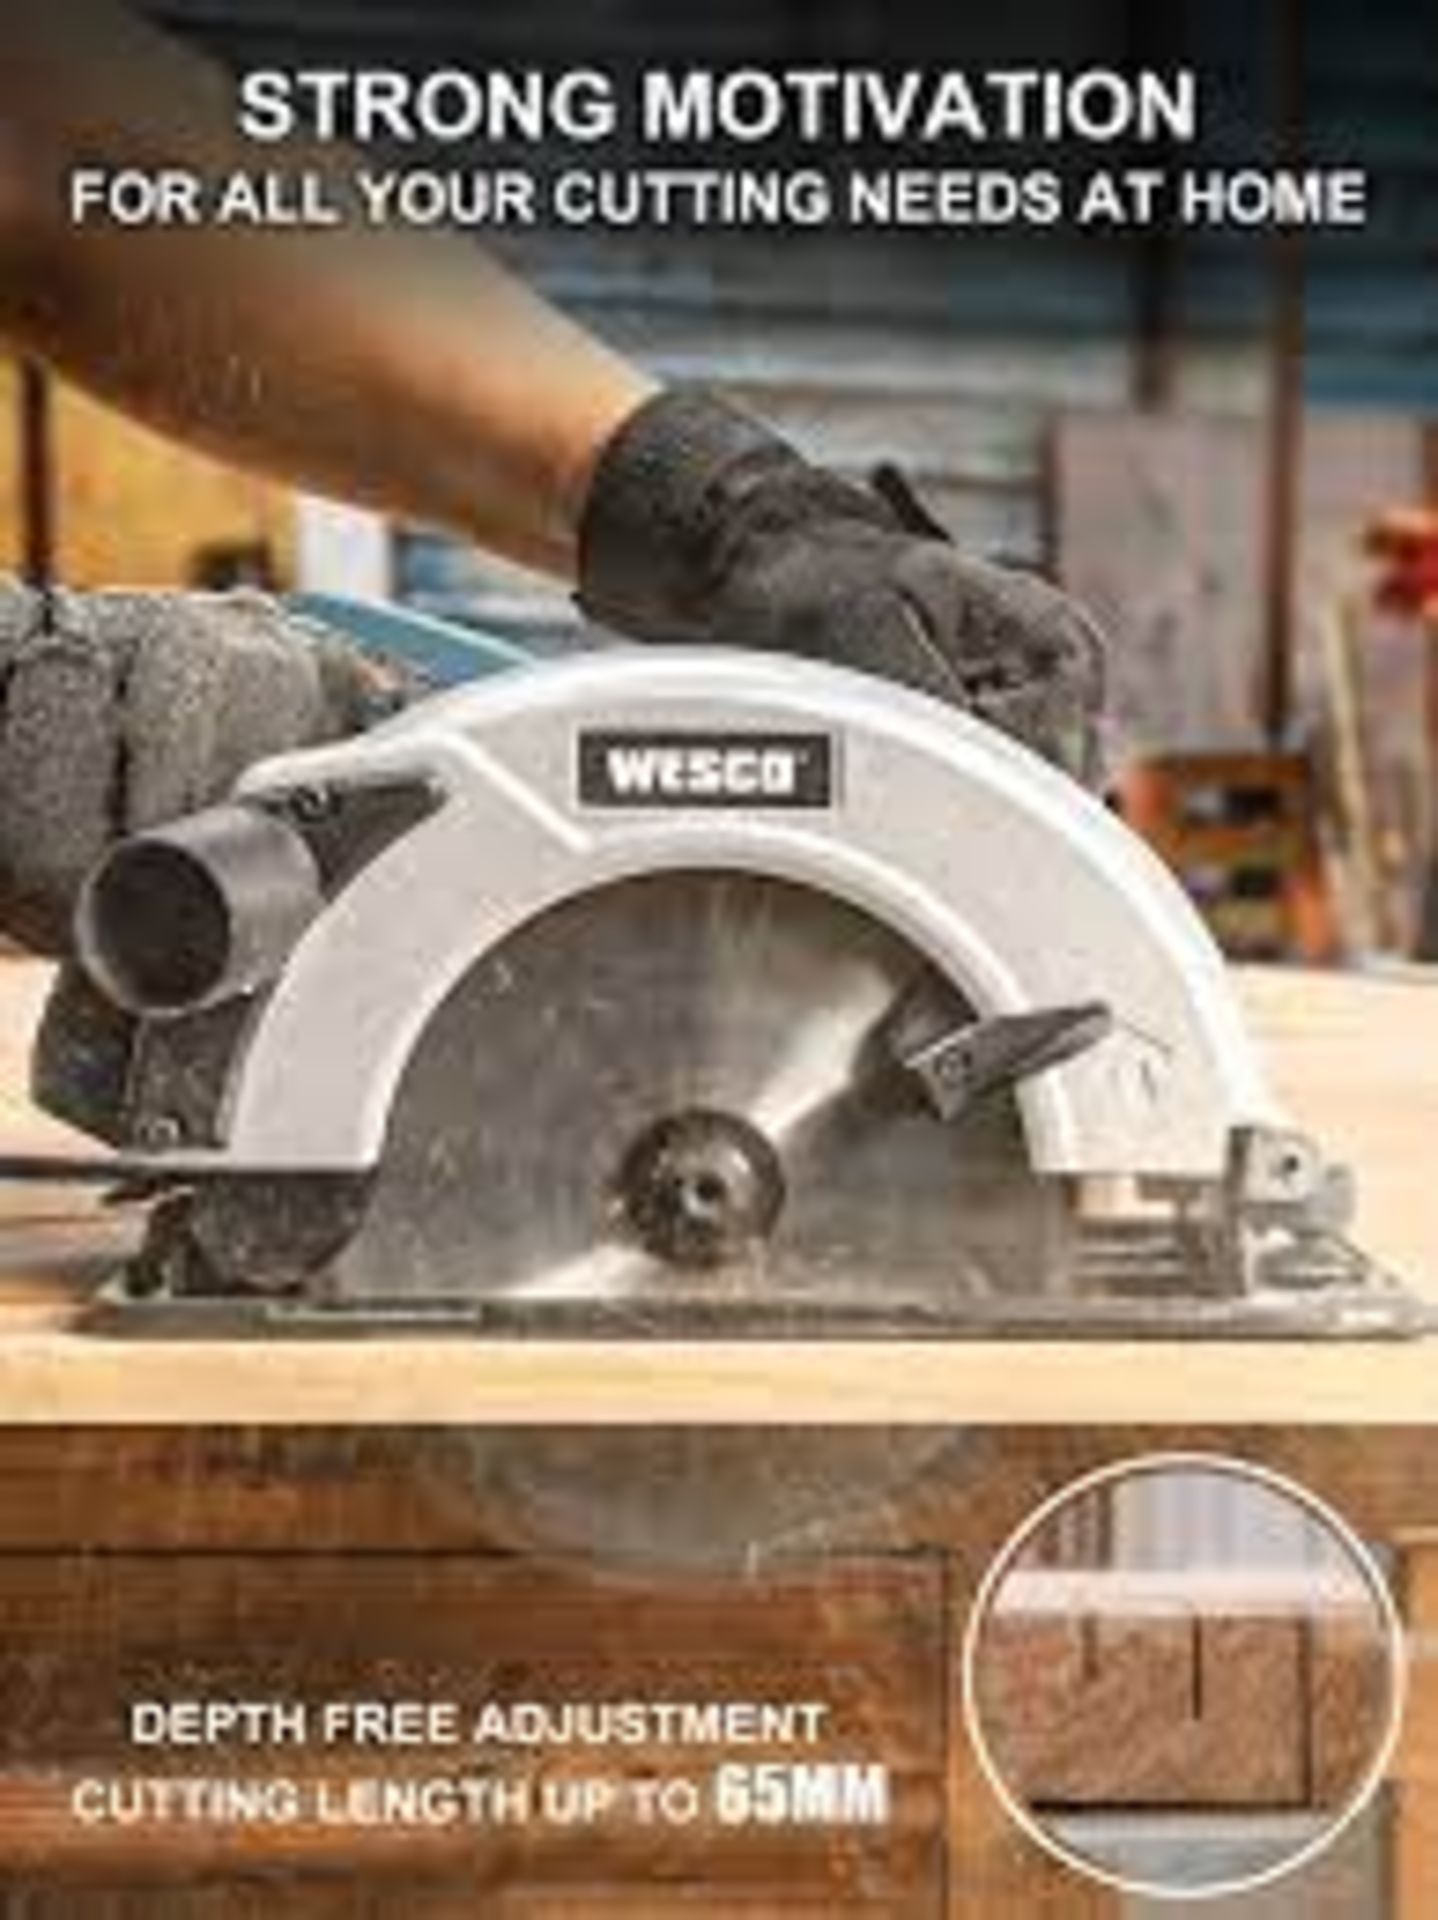 TRADE LOT 10 x New & Boxed WESCO Circular Saw 1400W 5800 RPM Skill Saw. Cutting Depth: 90°: 65mm- - Image 2 of 2